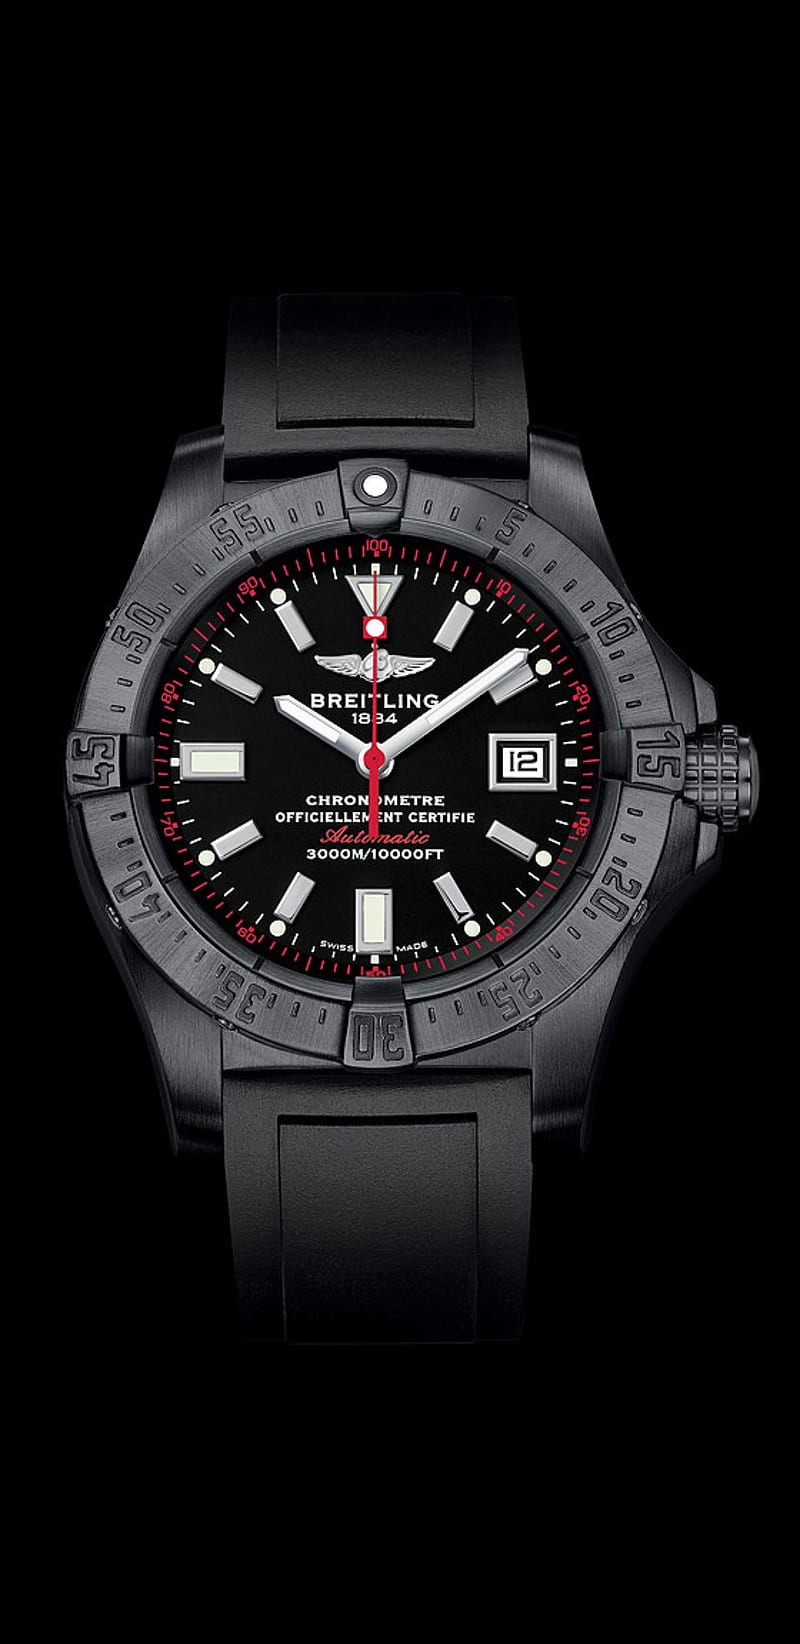 BREITLING, watch, diving, watches, money, diamonds, tag, logo, HD phone wallpaper